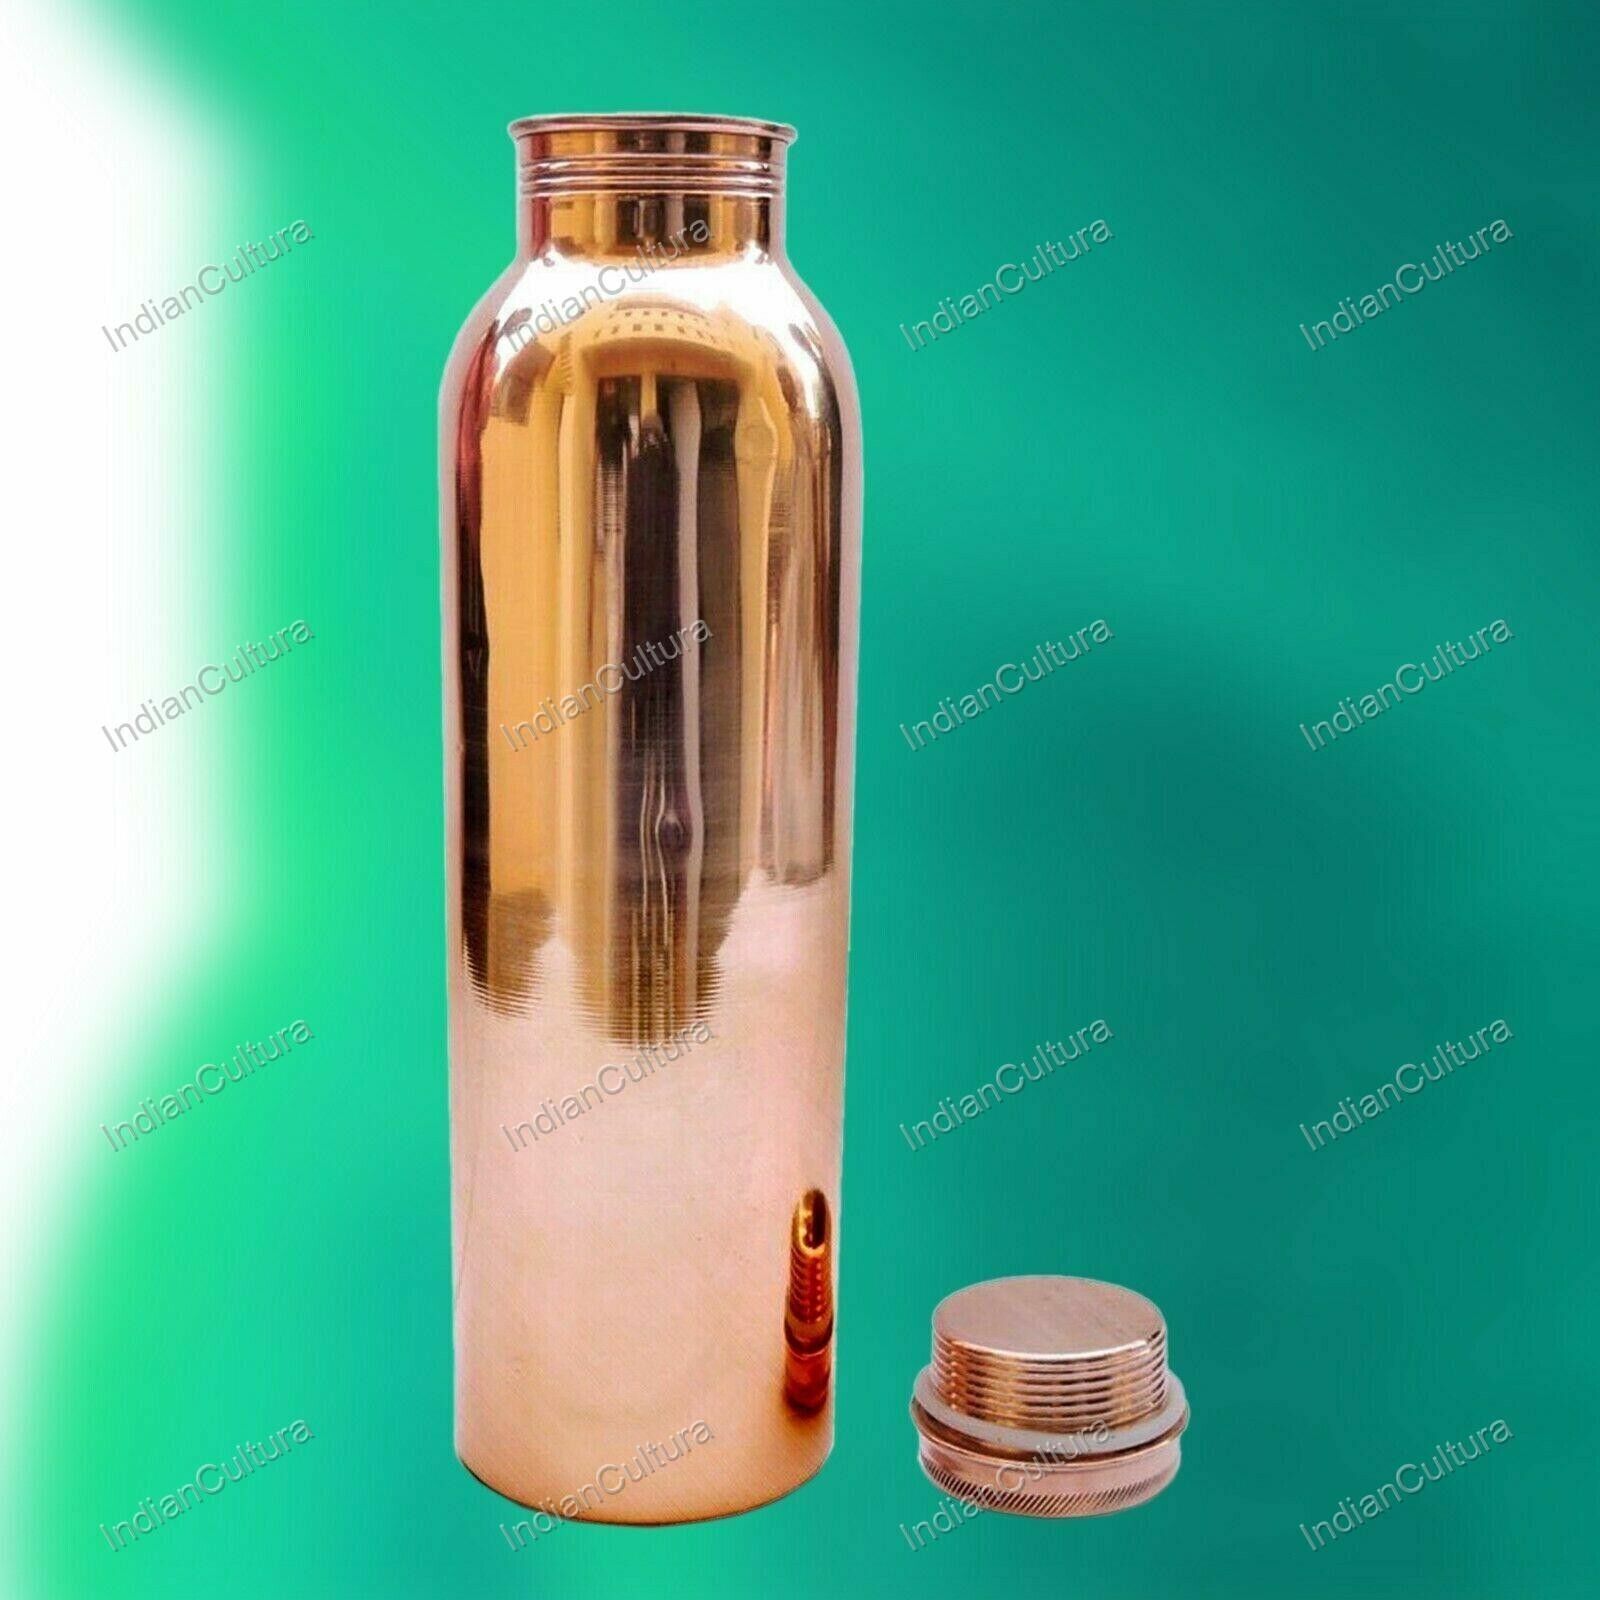 New Indian 100% Copper Water Bottle Ayurveda For Health Benefits Spill Proof